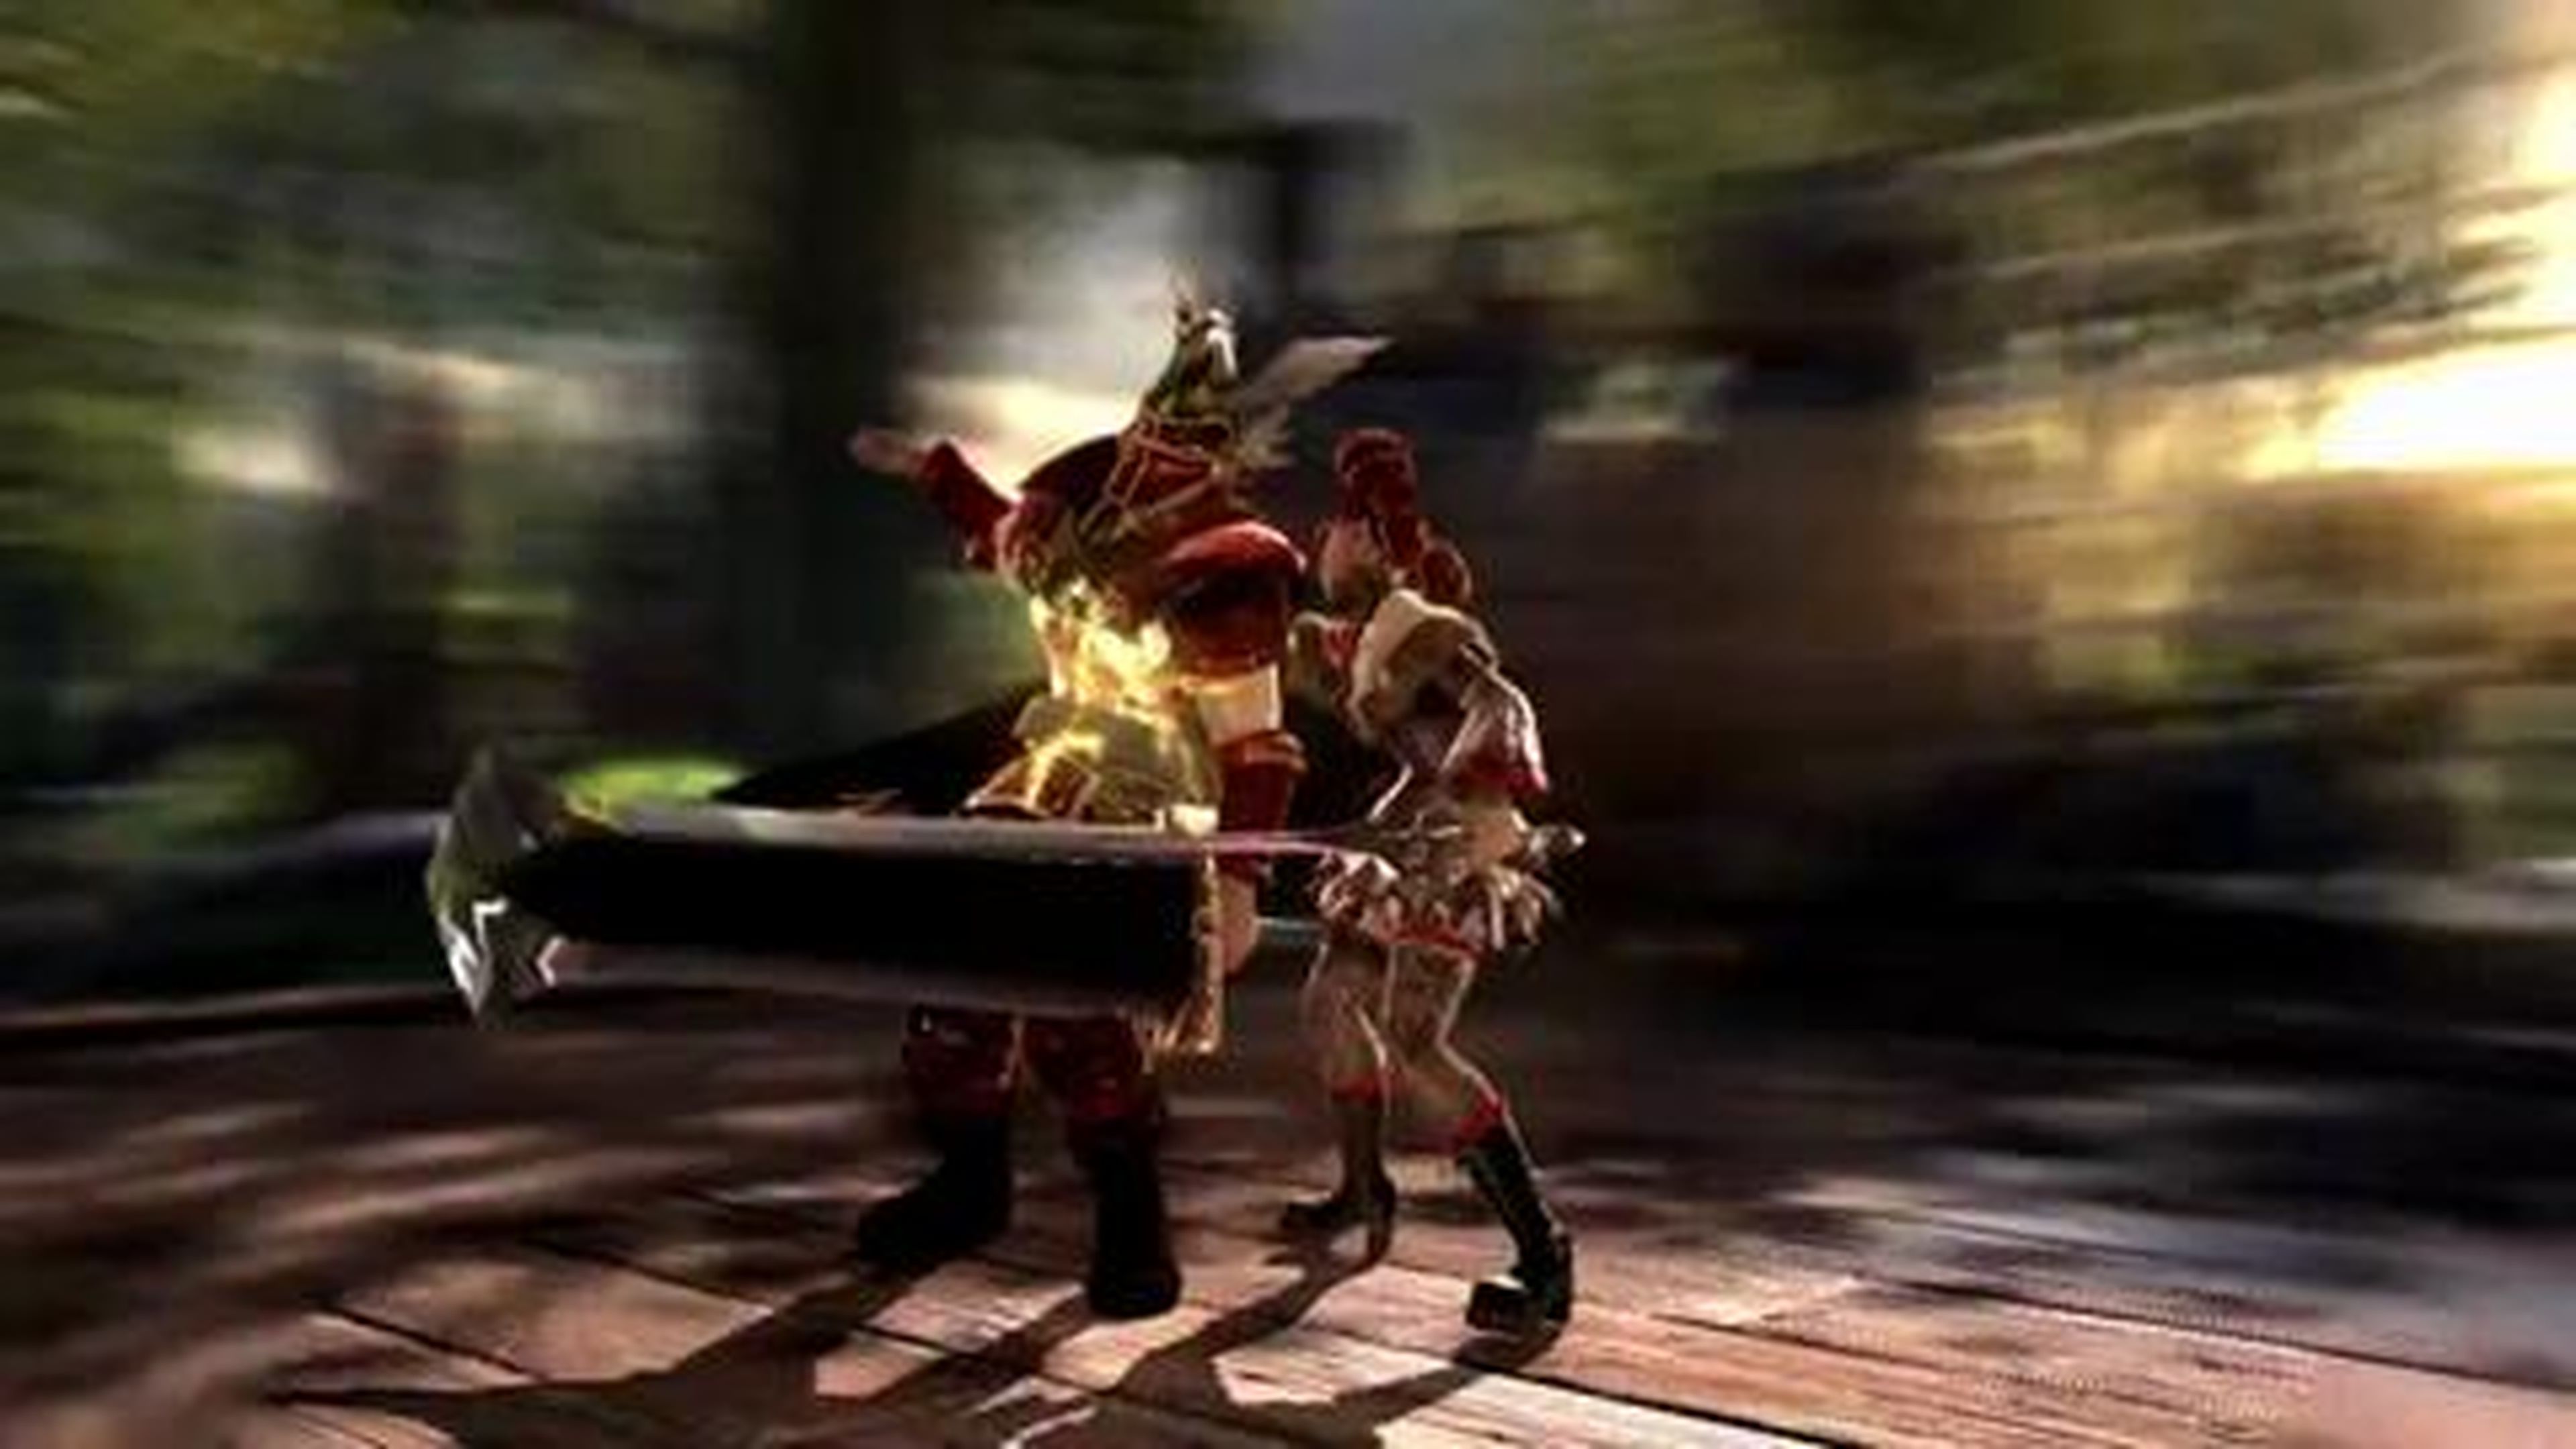 SoulCalibur Lost Swords - PS3 - Amy 'A young woman bound by silence' (Trailer)